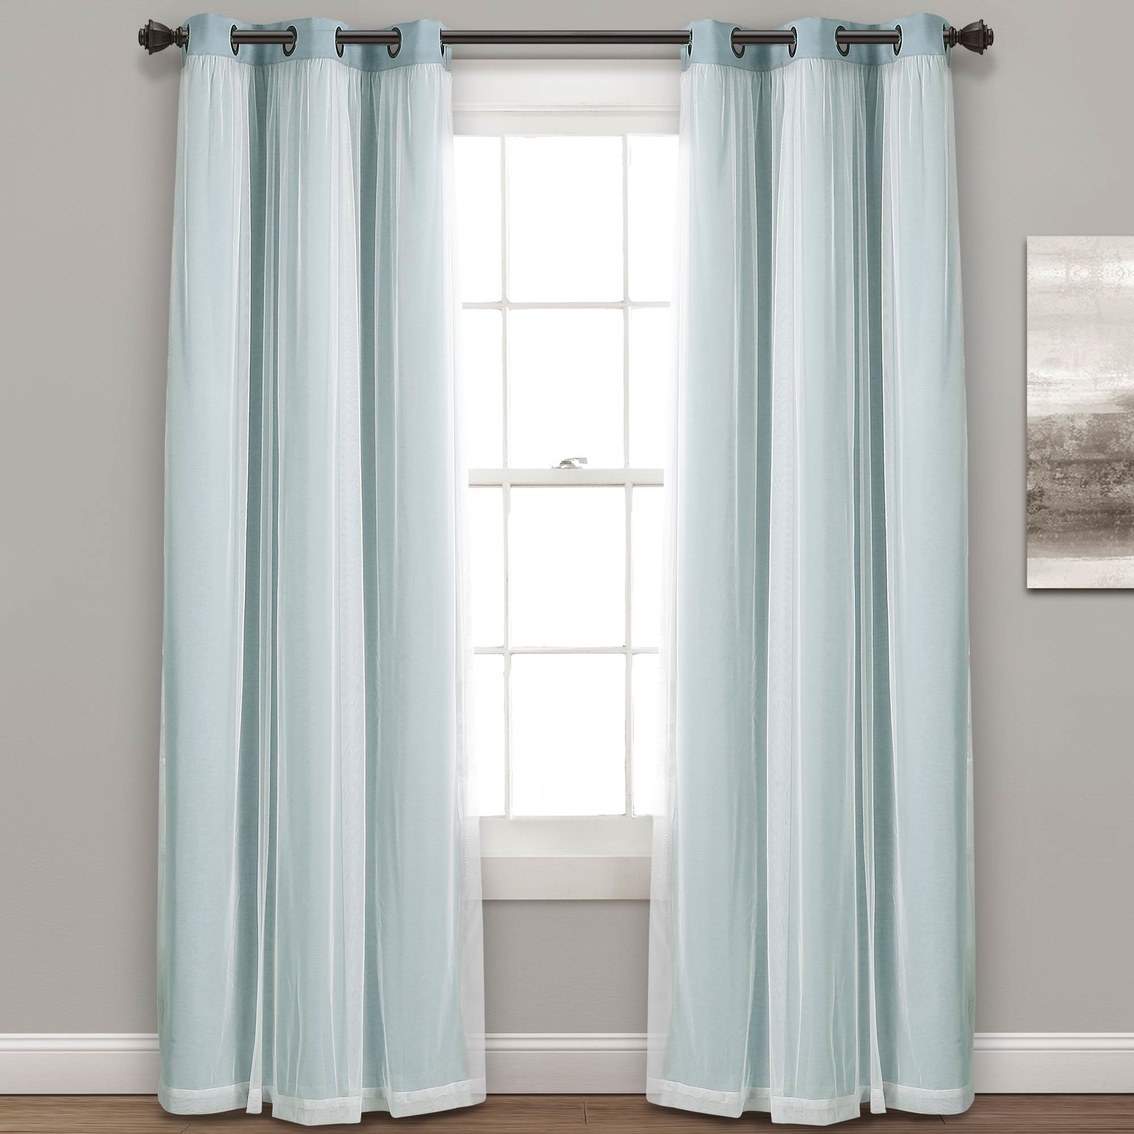 Lush Decor Grommet Sheer Panels with Insulated Blackout Lining 2 pk. Curtains Set - Image 2 of 4